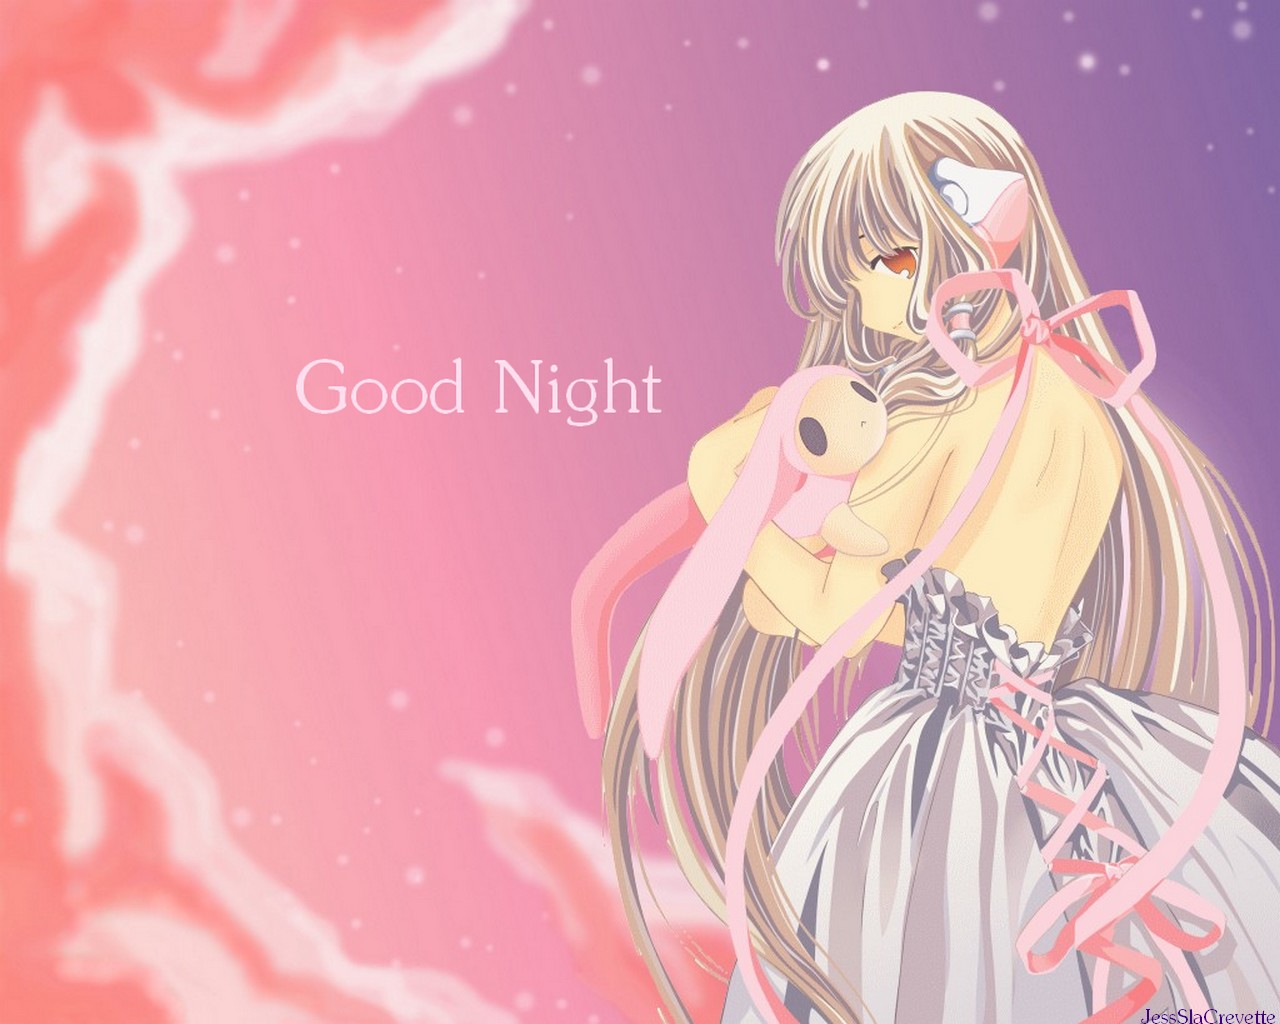 Chobits Picture by clamp